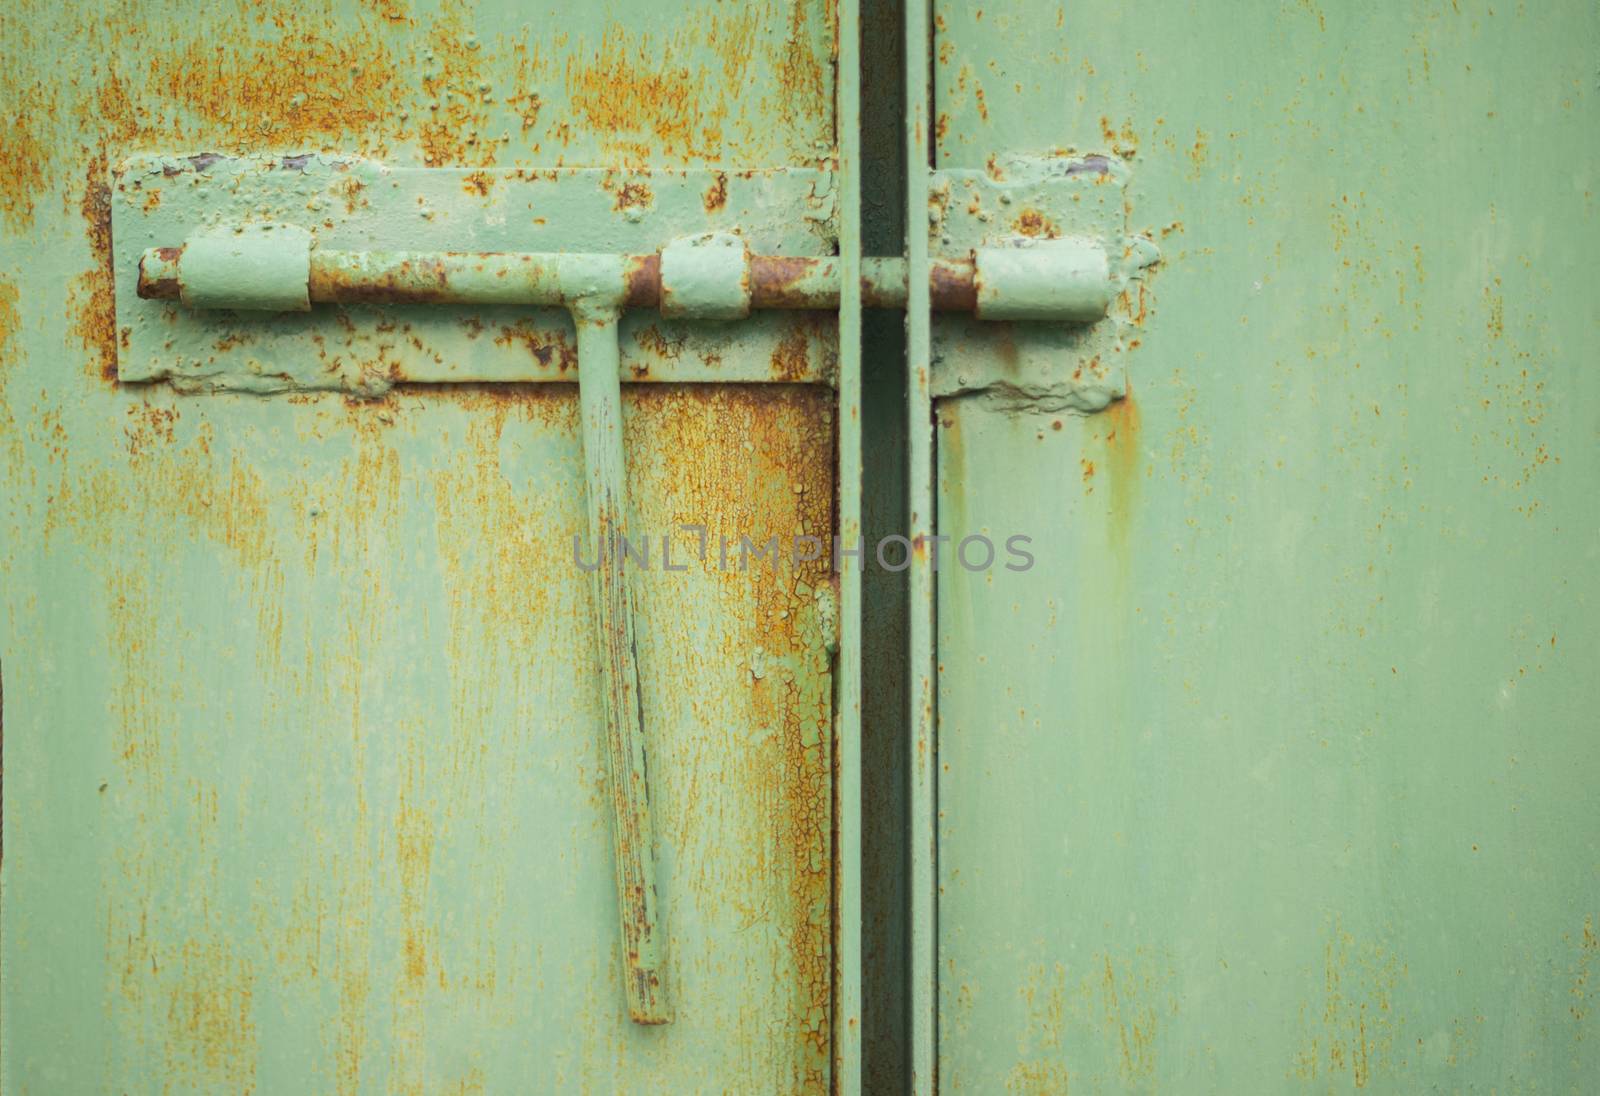 lock on rusty iron door. For your commercial and editorial use